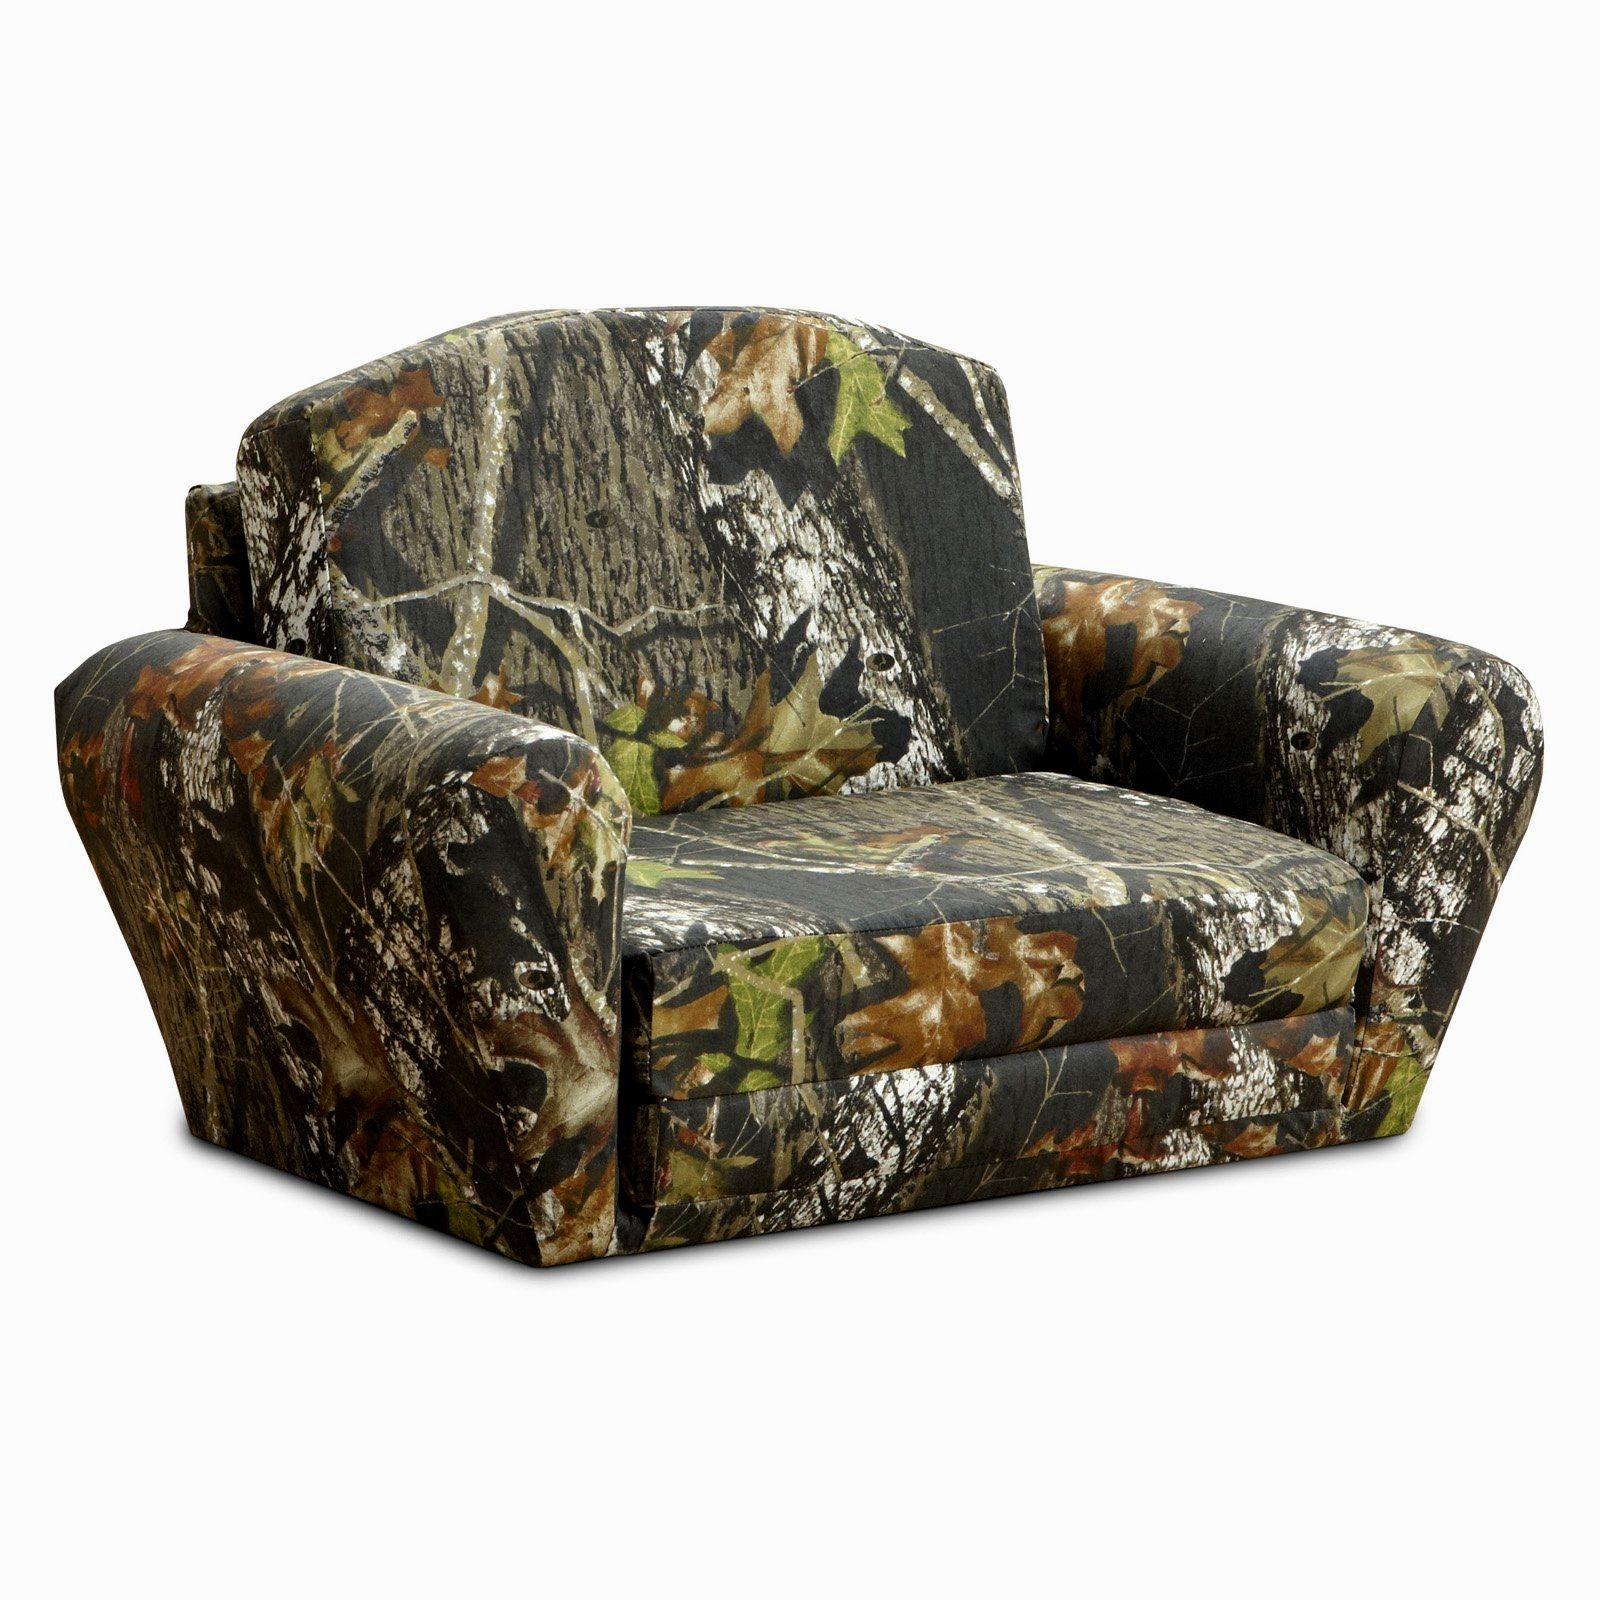 Camouflage couch